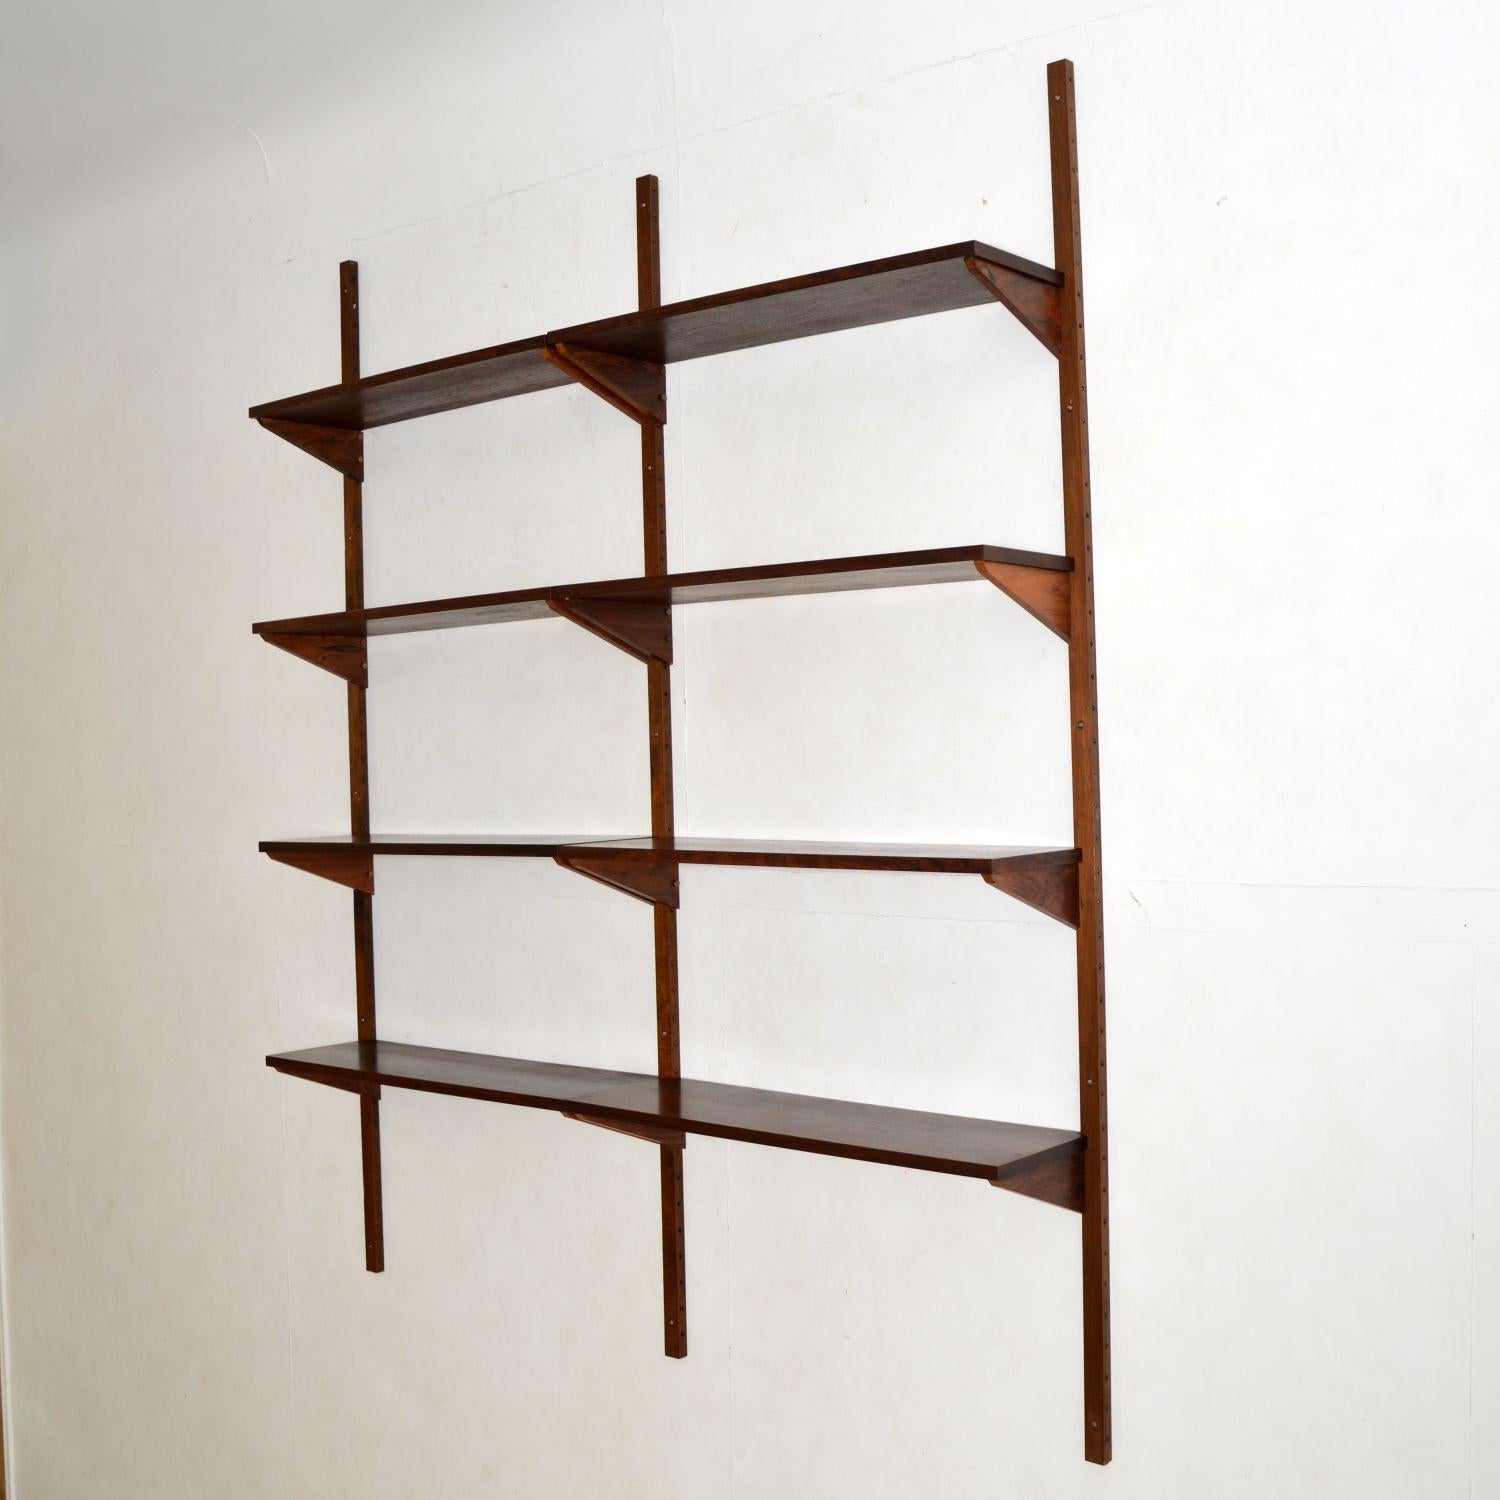 A stylish and practical two bay wall mounting PS shelving system in wood. This was made in Denmark by Randers Mobelfabrik, it was designed by Preben Sorensen, and dates from the 1960’s.

This consists of three wall mounting rails, and eight wood